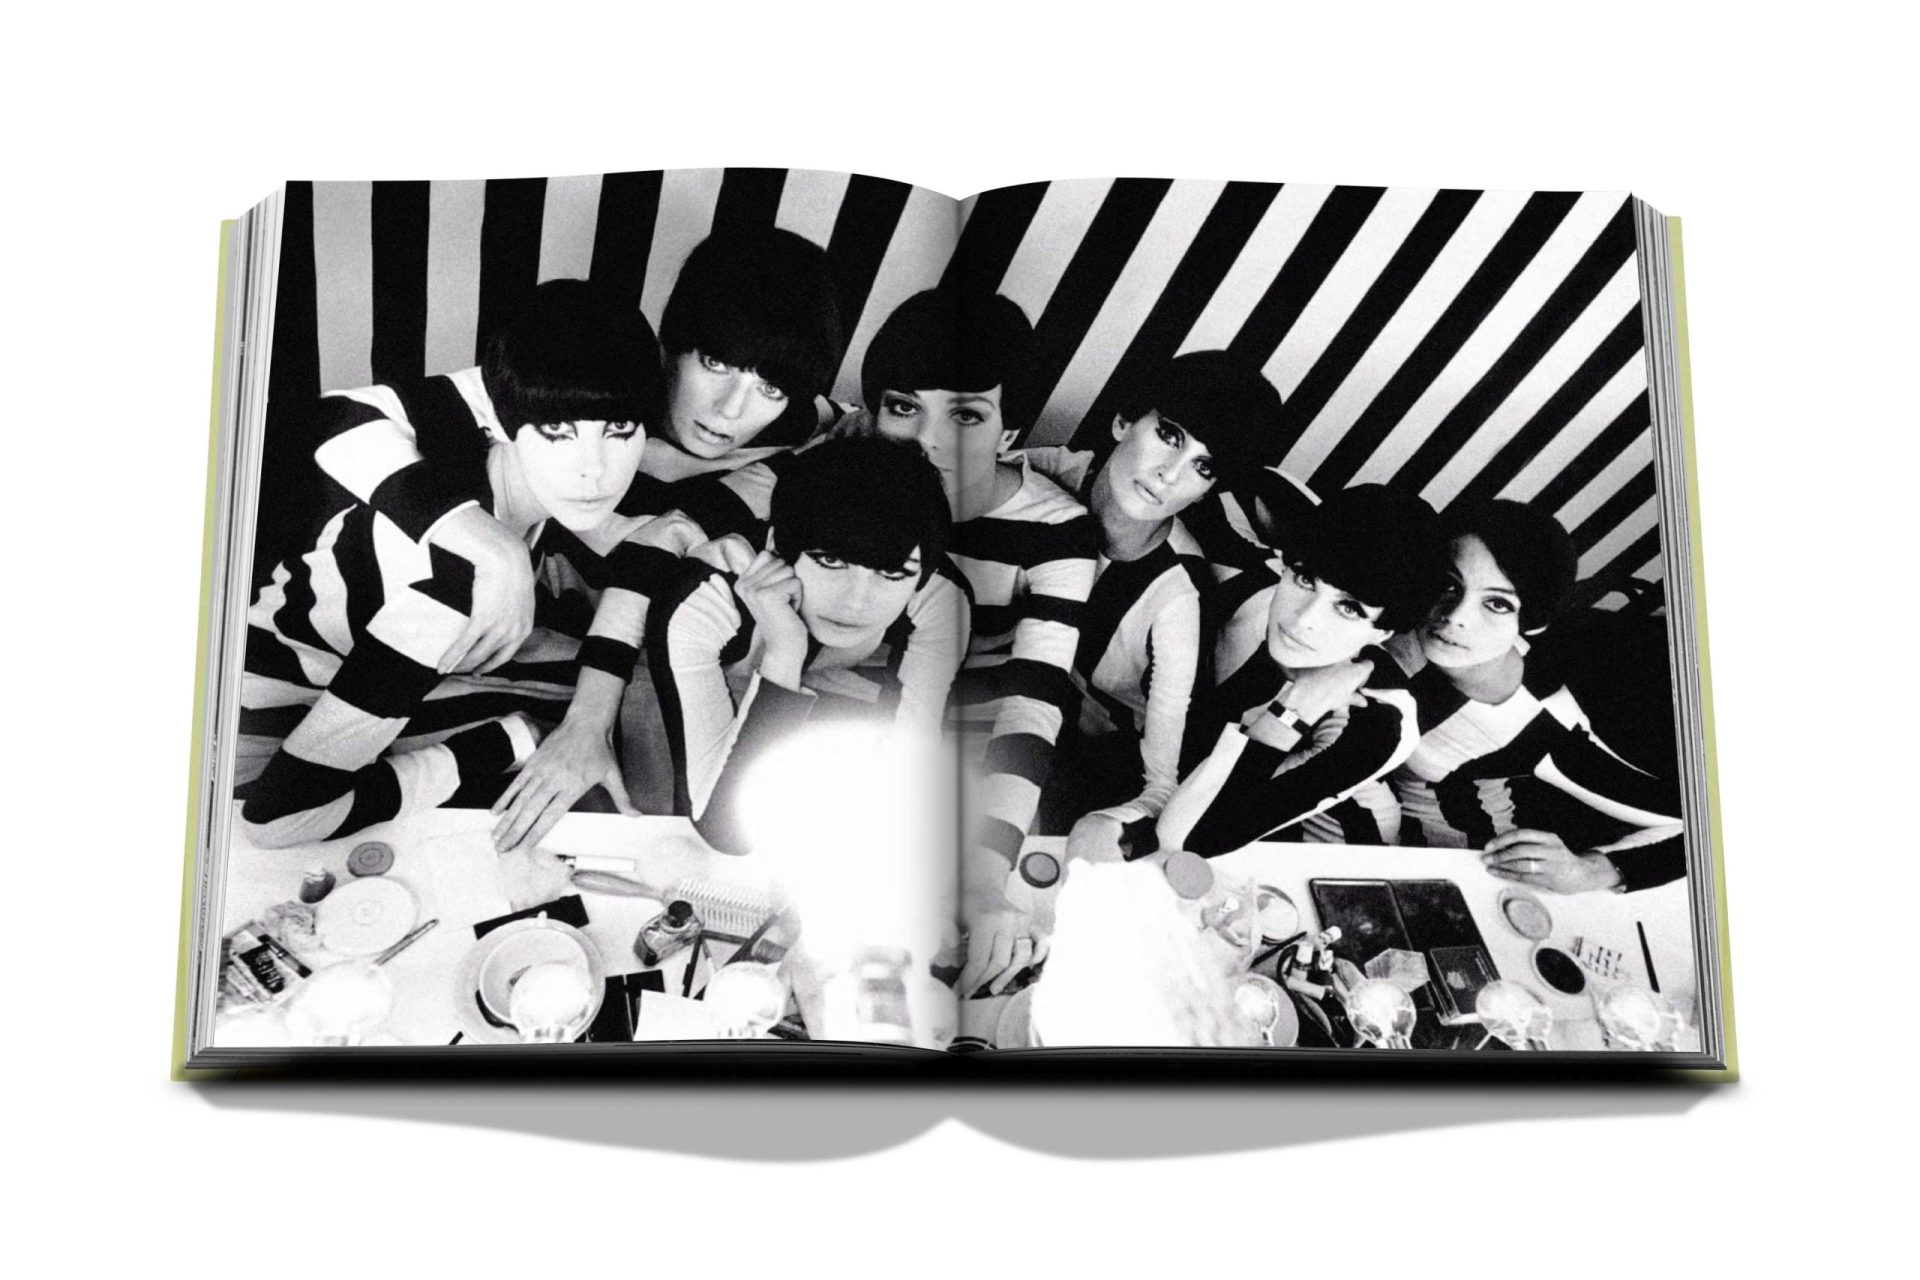 Pop Art Style by Julie Belcove - Coffee Table Book